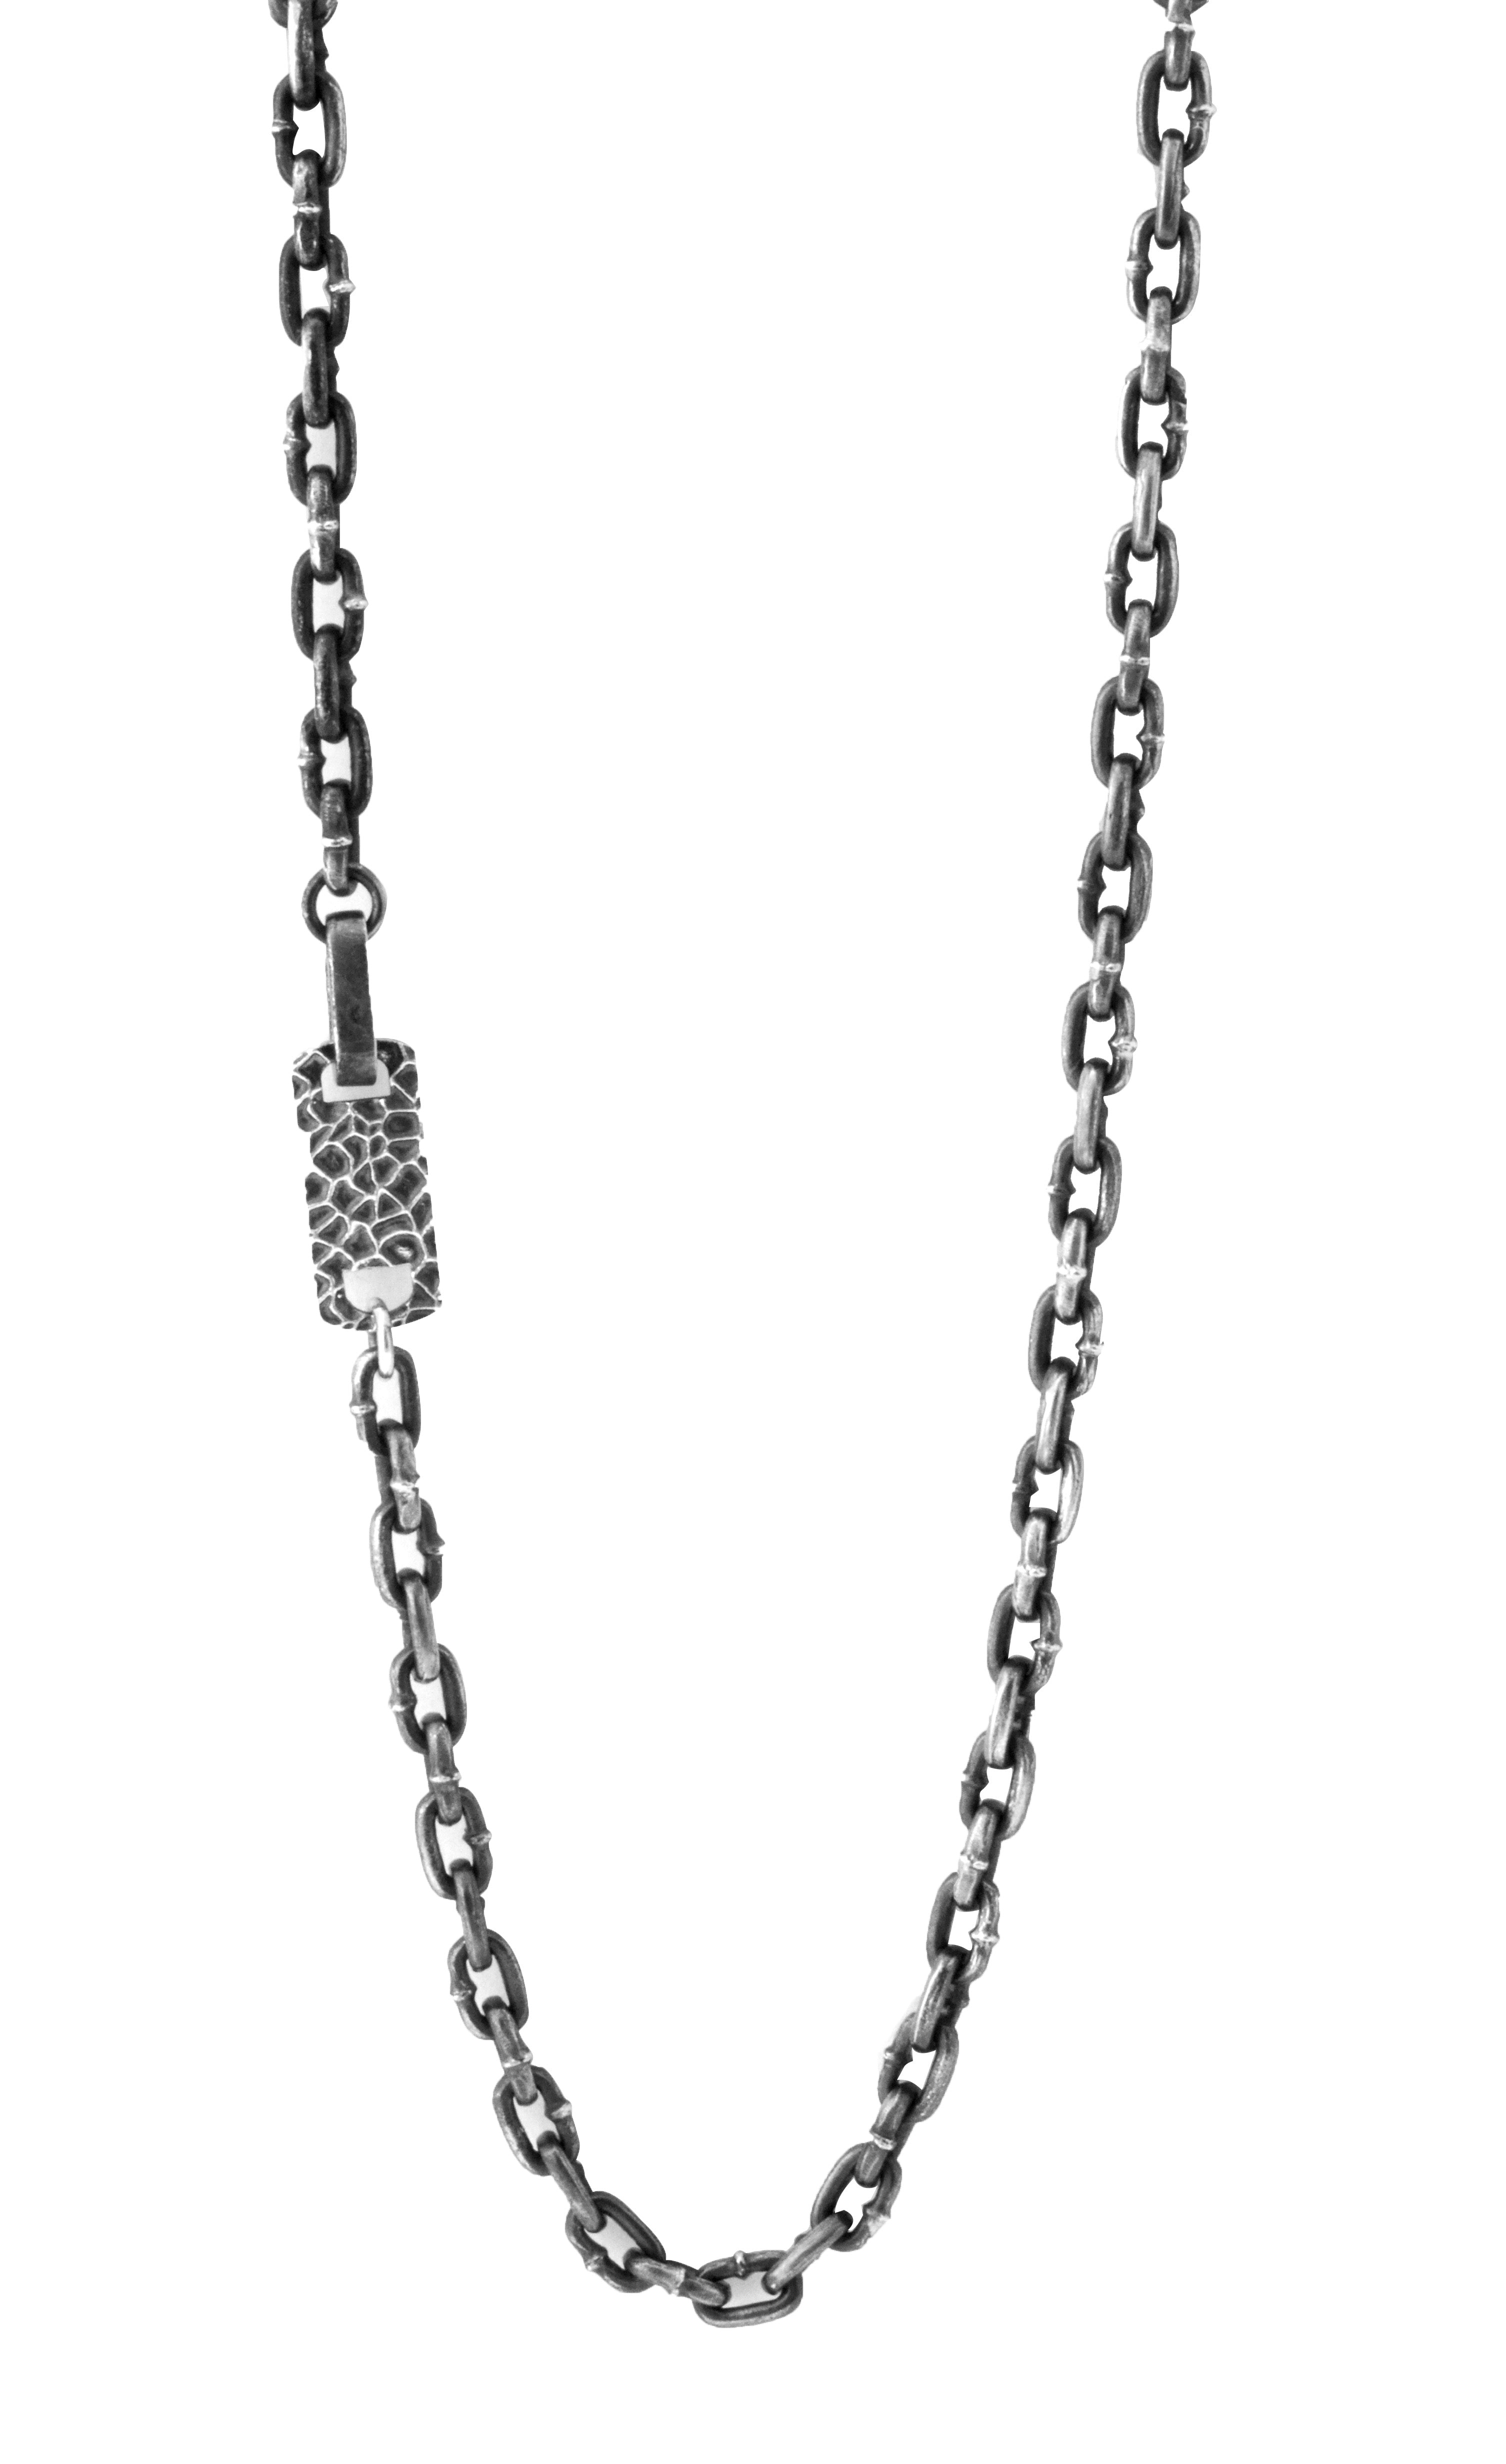 BOAT LINK NECKLACE WITH LOBSTER CLASP (24 IN. LENGTH)